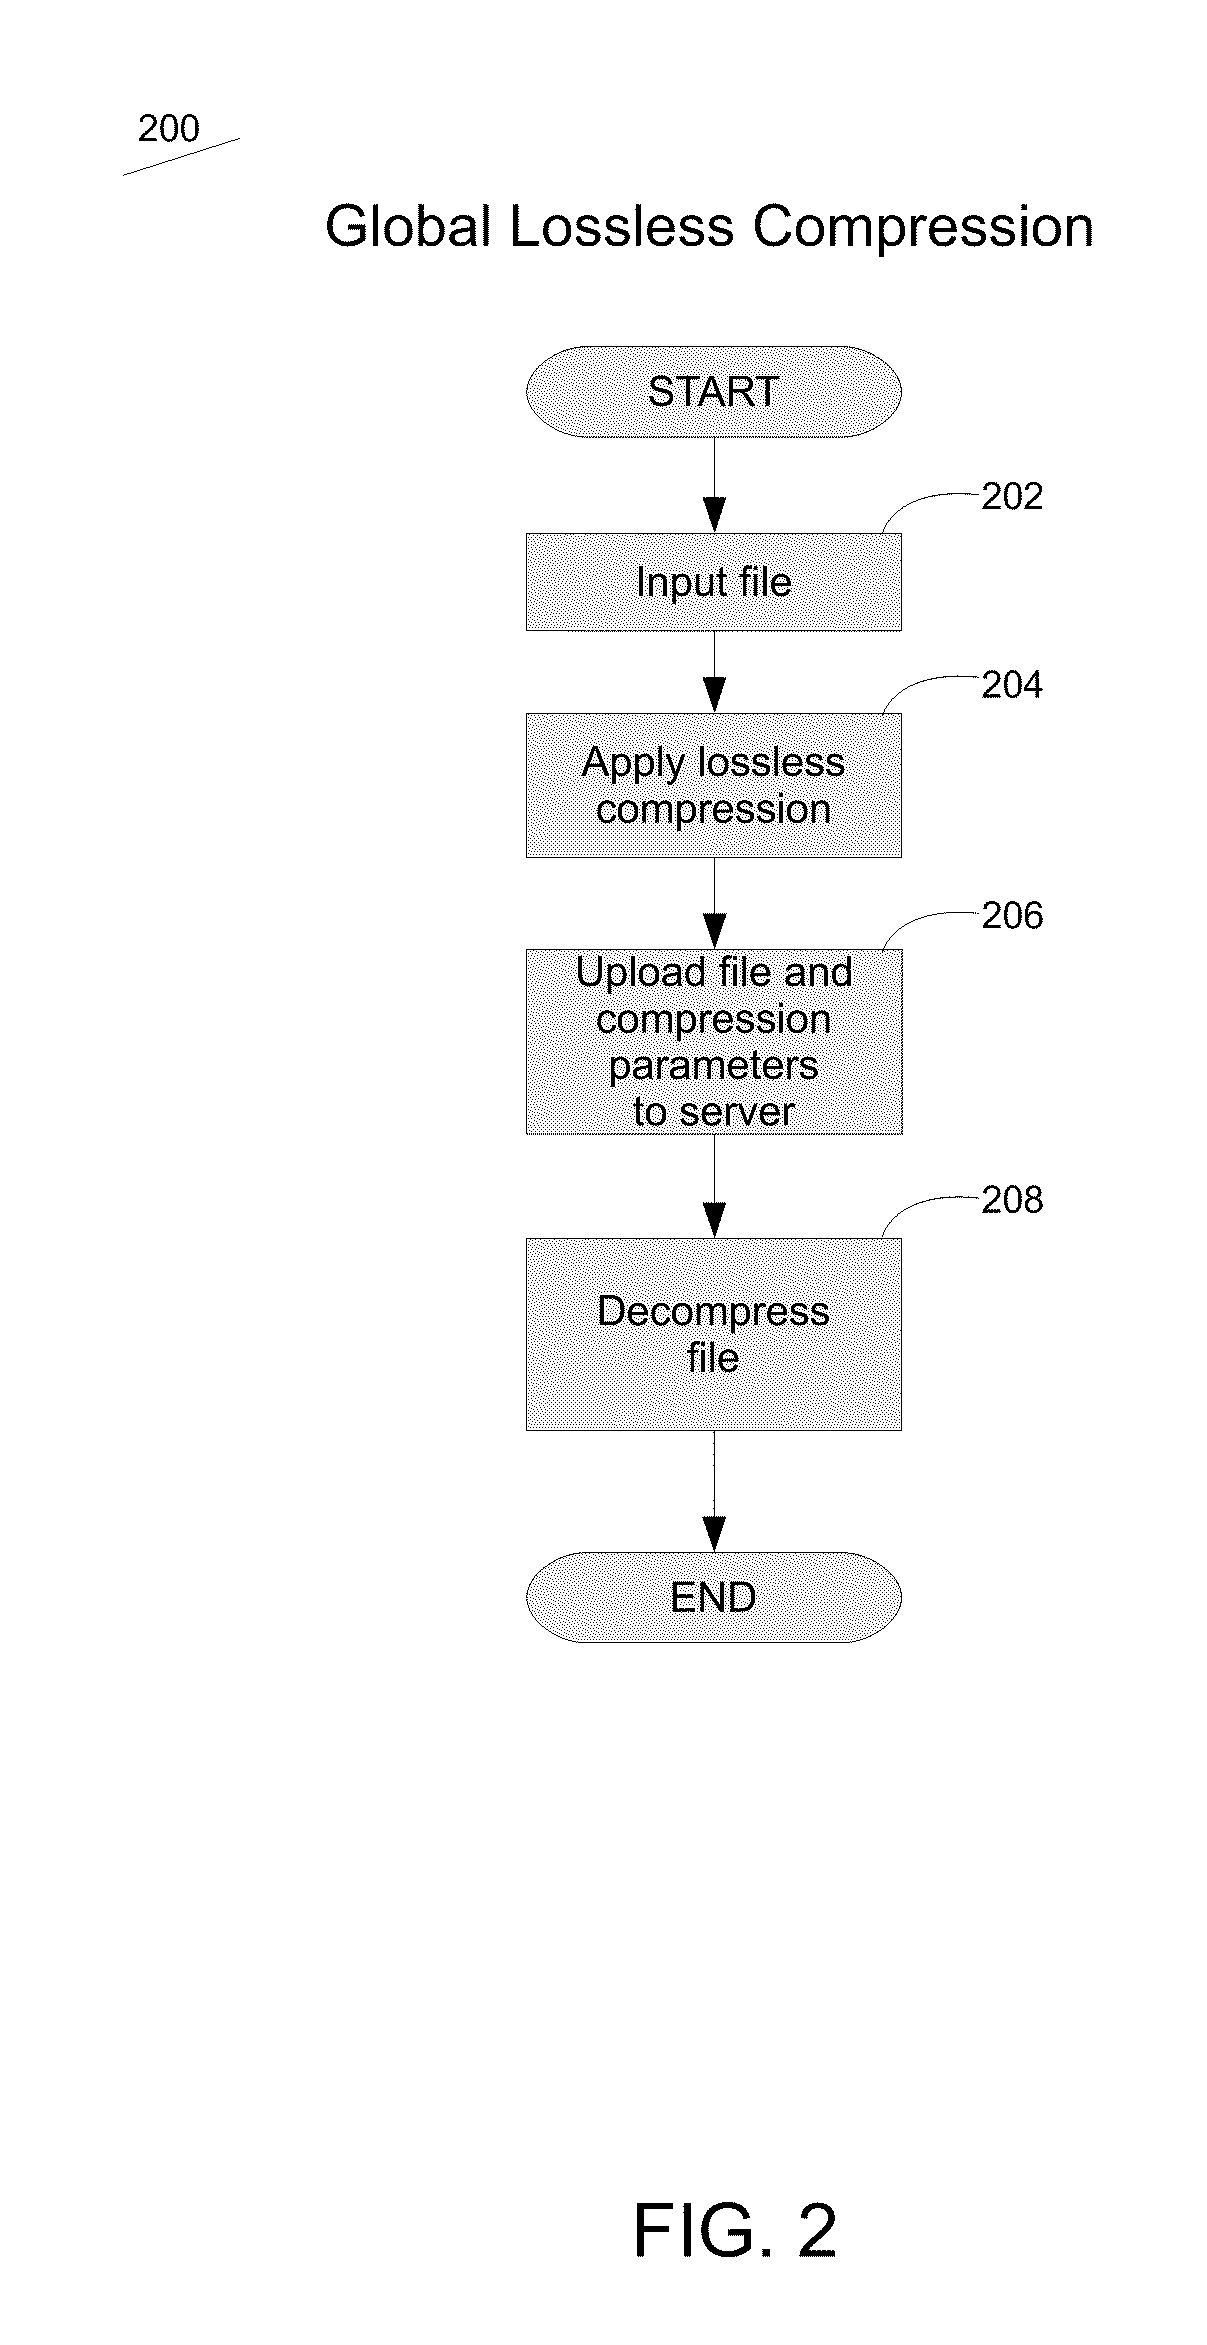 Method and System for Optimizing the Content and Transfer of Media Files